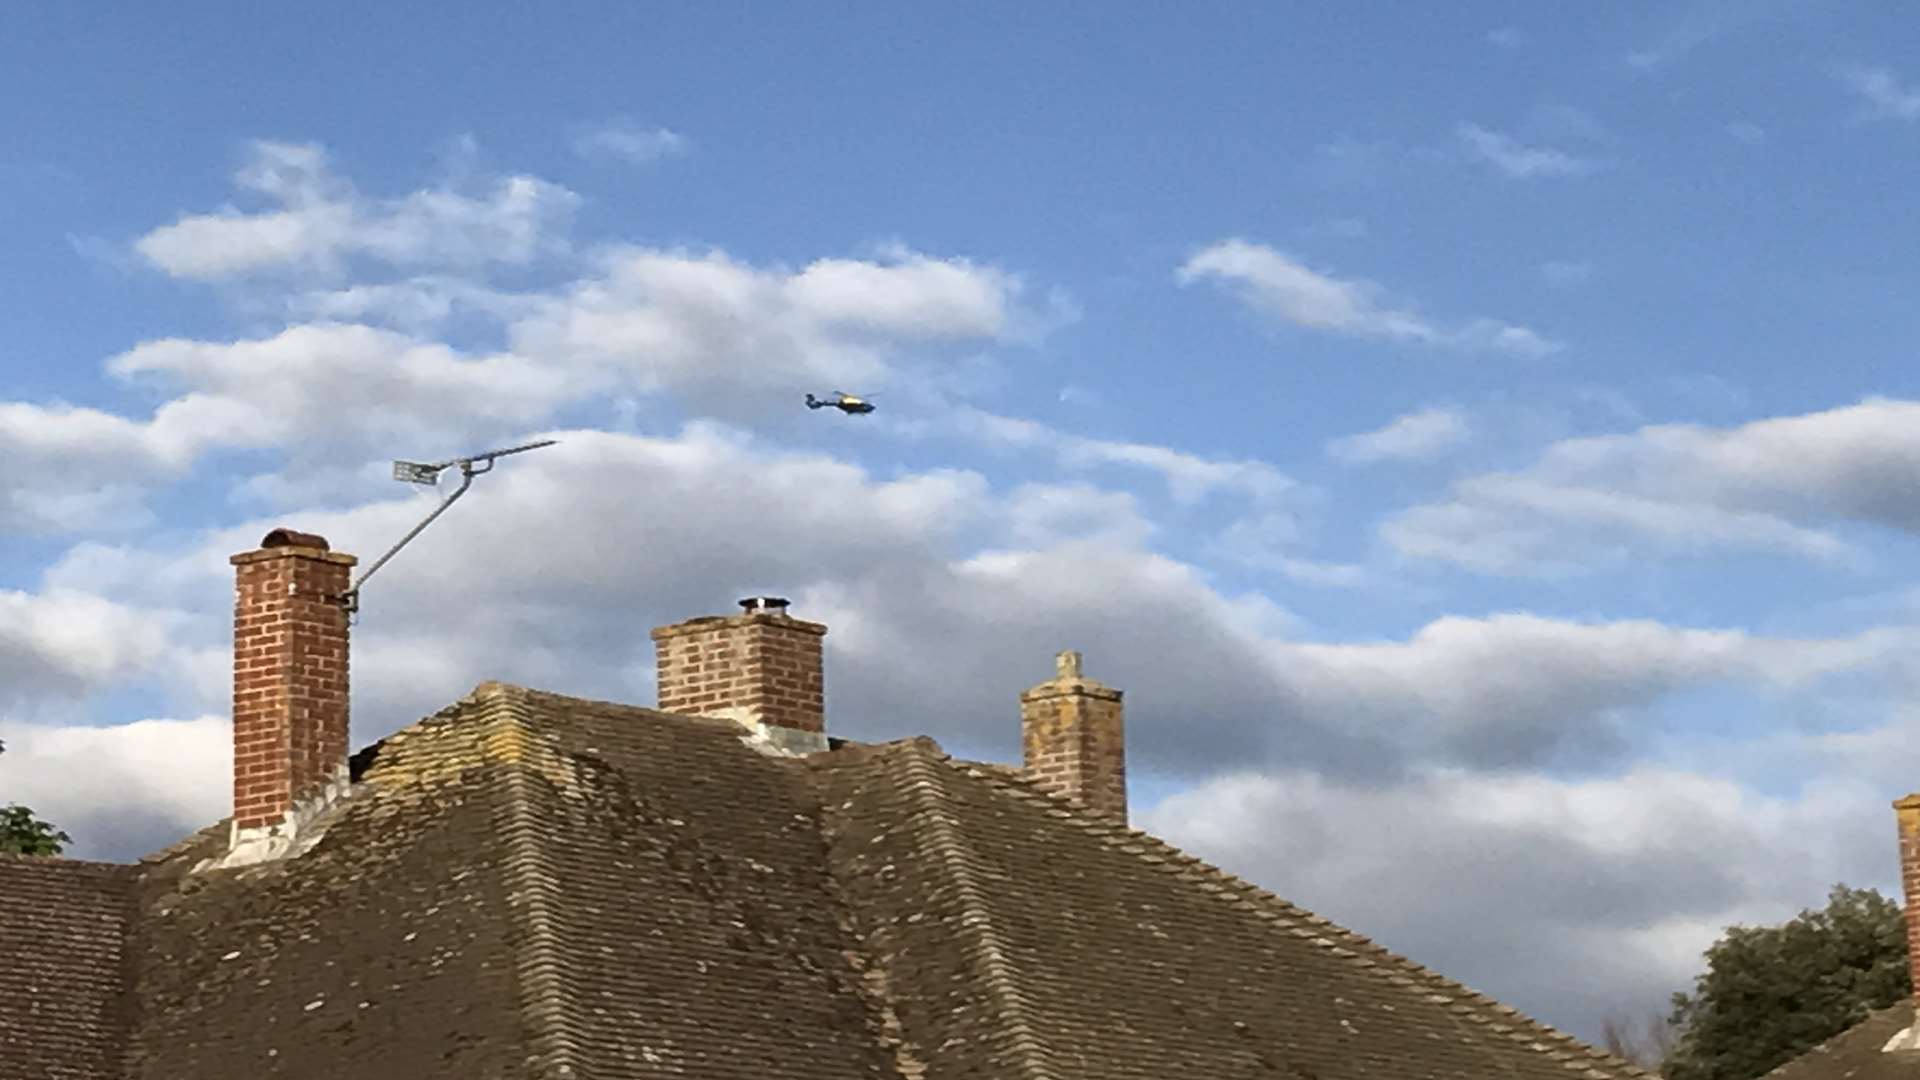 The Kent and Essex Police helicopter has been spotted over Barming this evening.